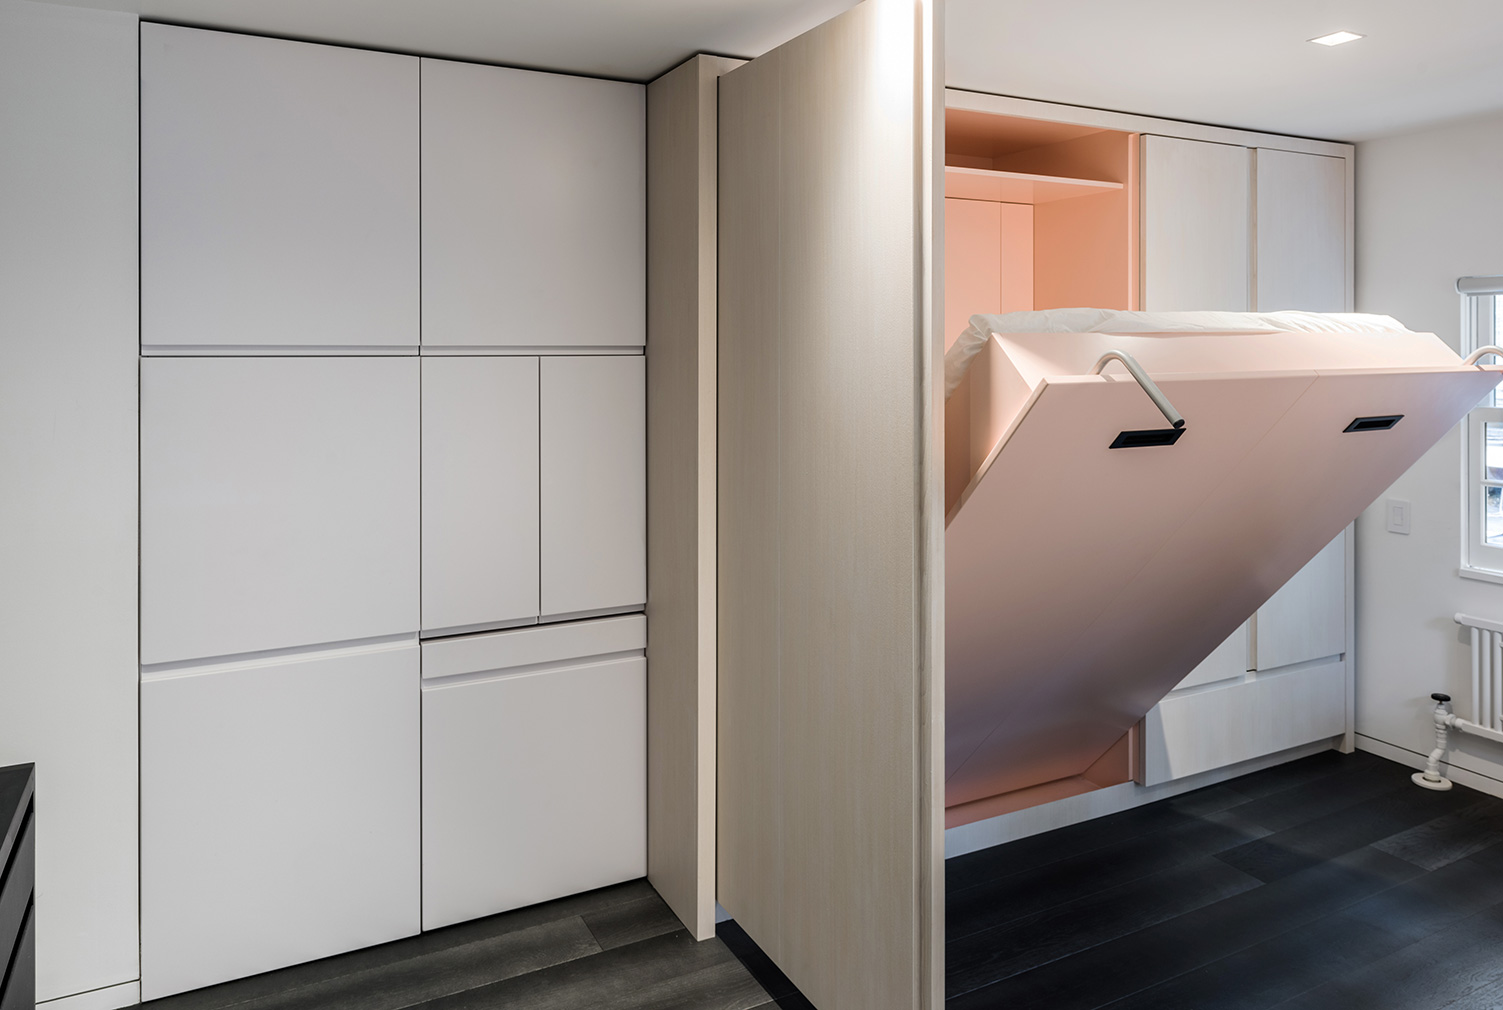 Micro home apartment designed by Michael Chen